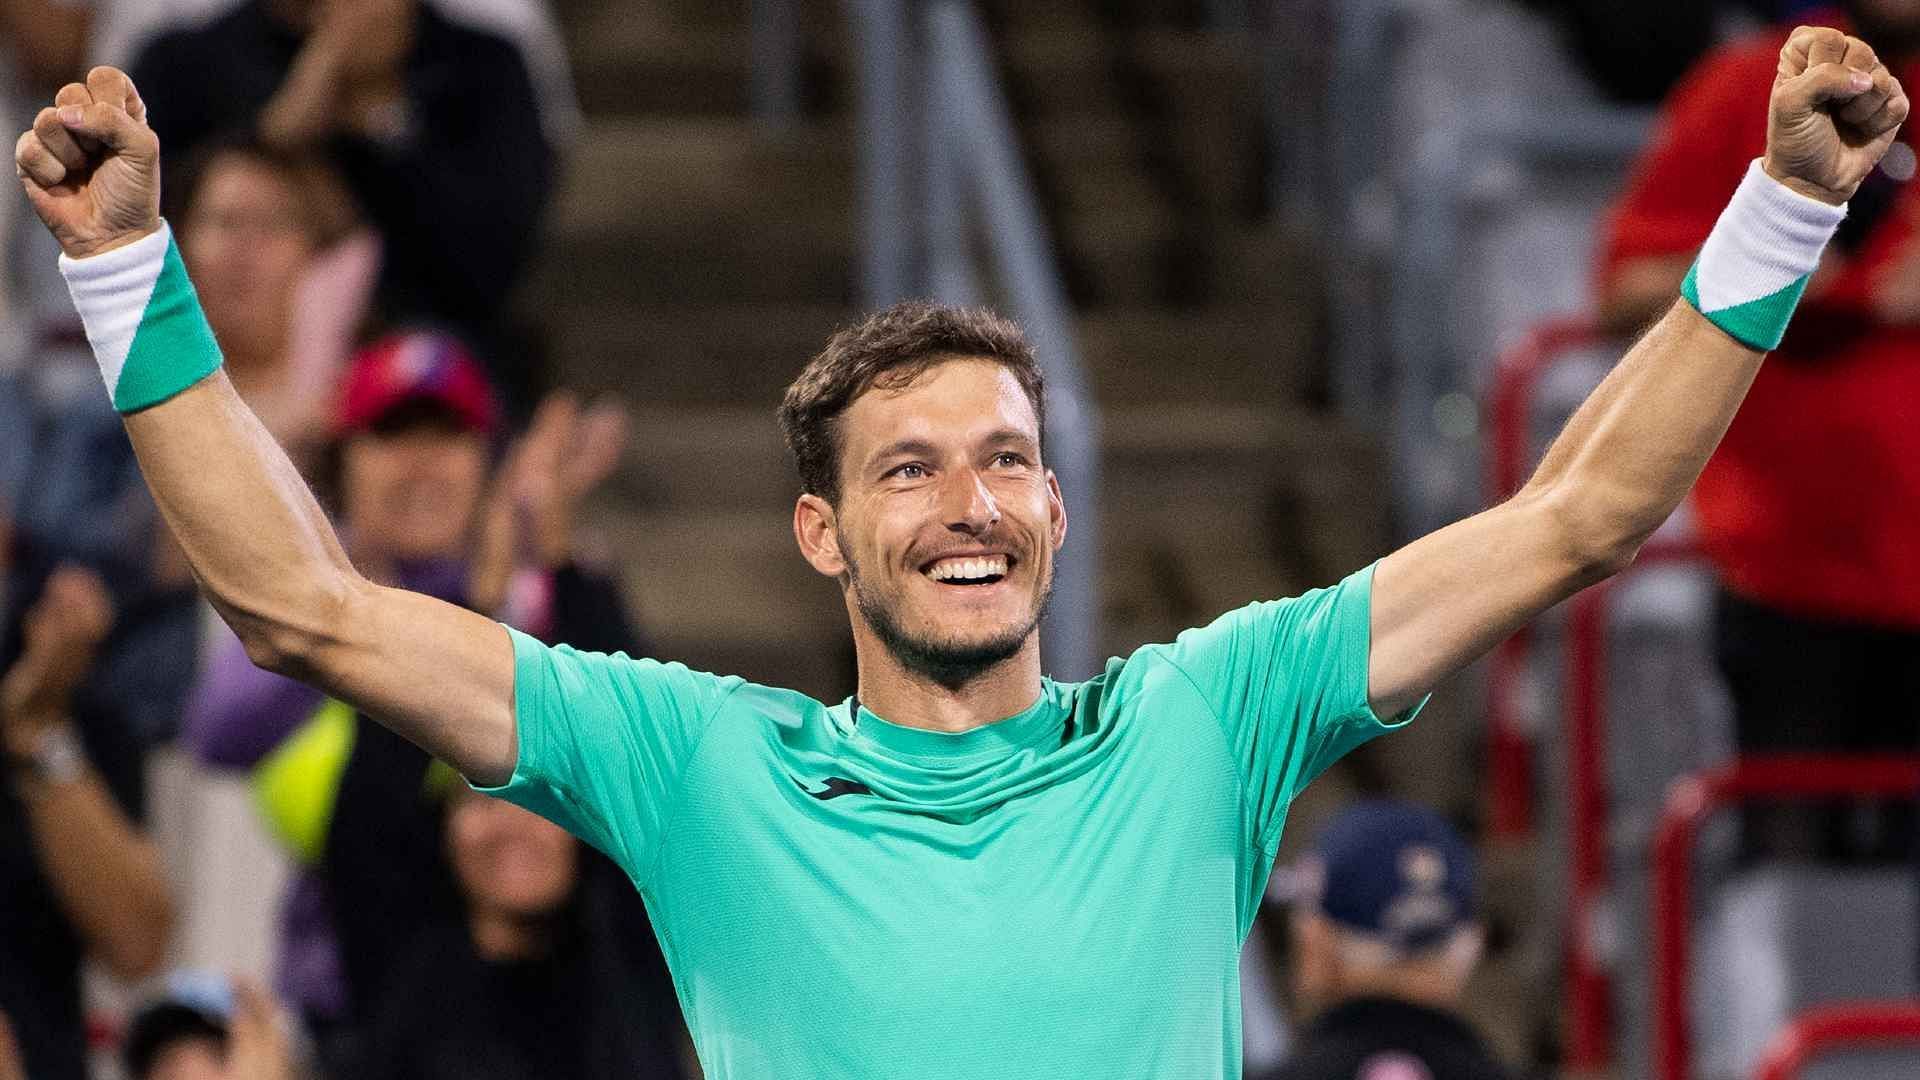 Pablo Carreno Busta won his first Masters 1000 title on Sunday